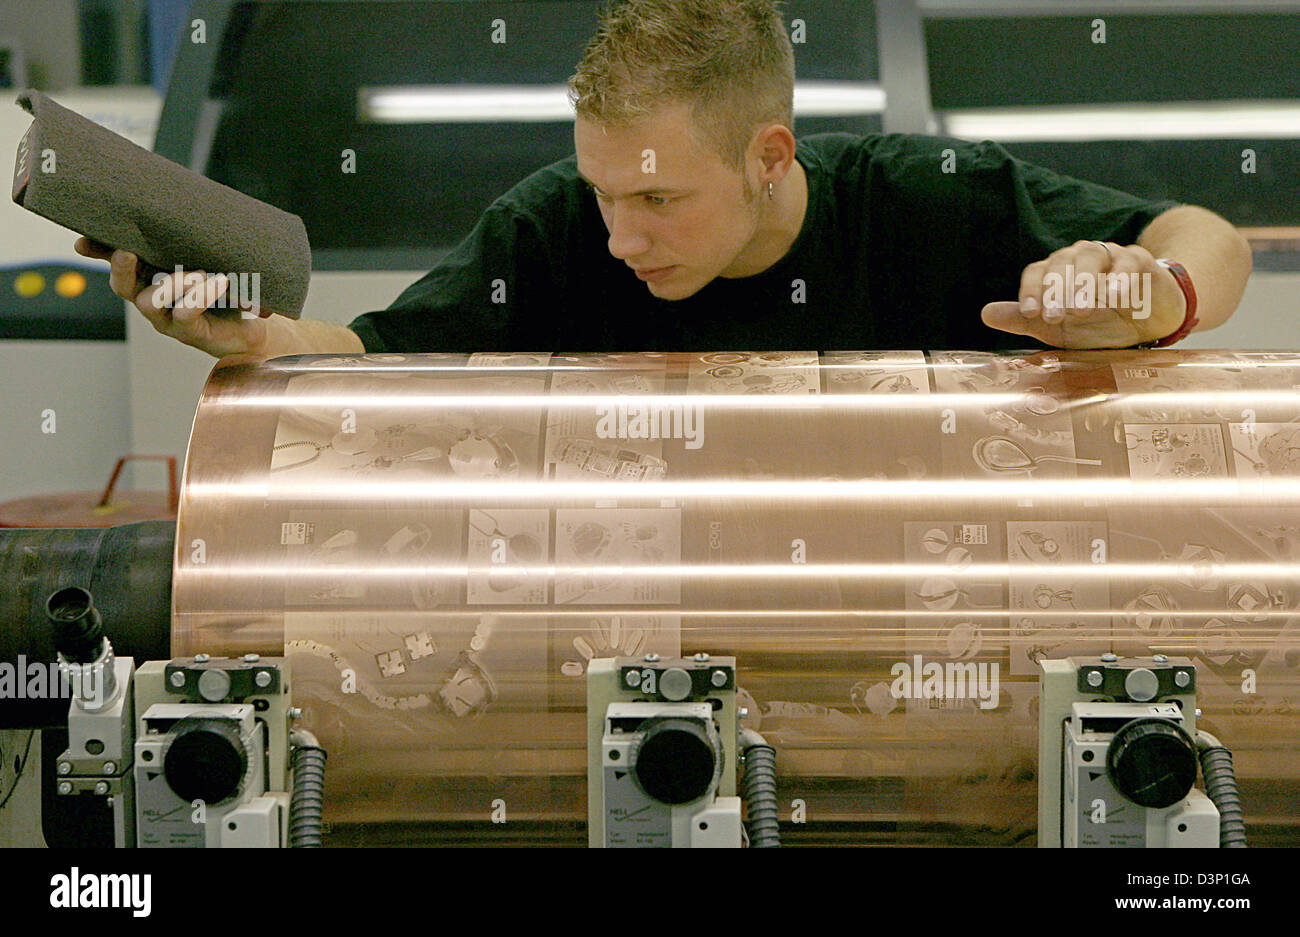 An employee at the print factory Prinovis checks the copper-plated gravure cylinder for possible flaws in Nuremberg, Germany, Tuesday 27 June 2006. Photo: Daniel Karmann Stock Photo